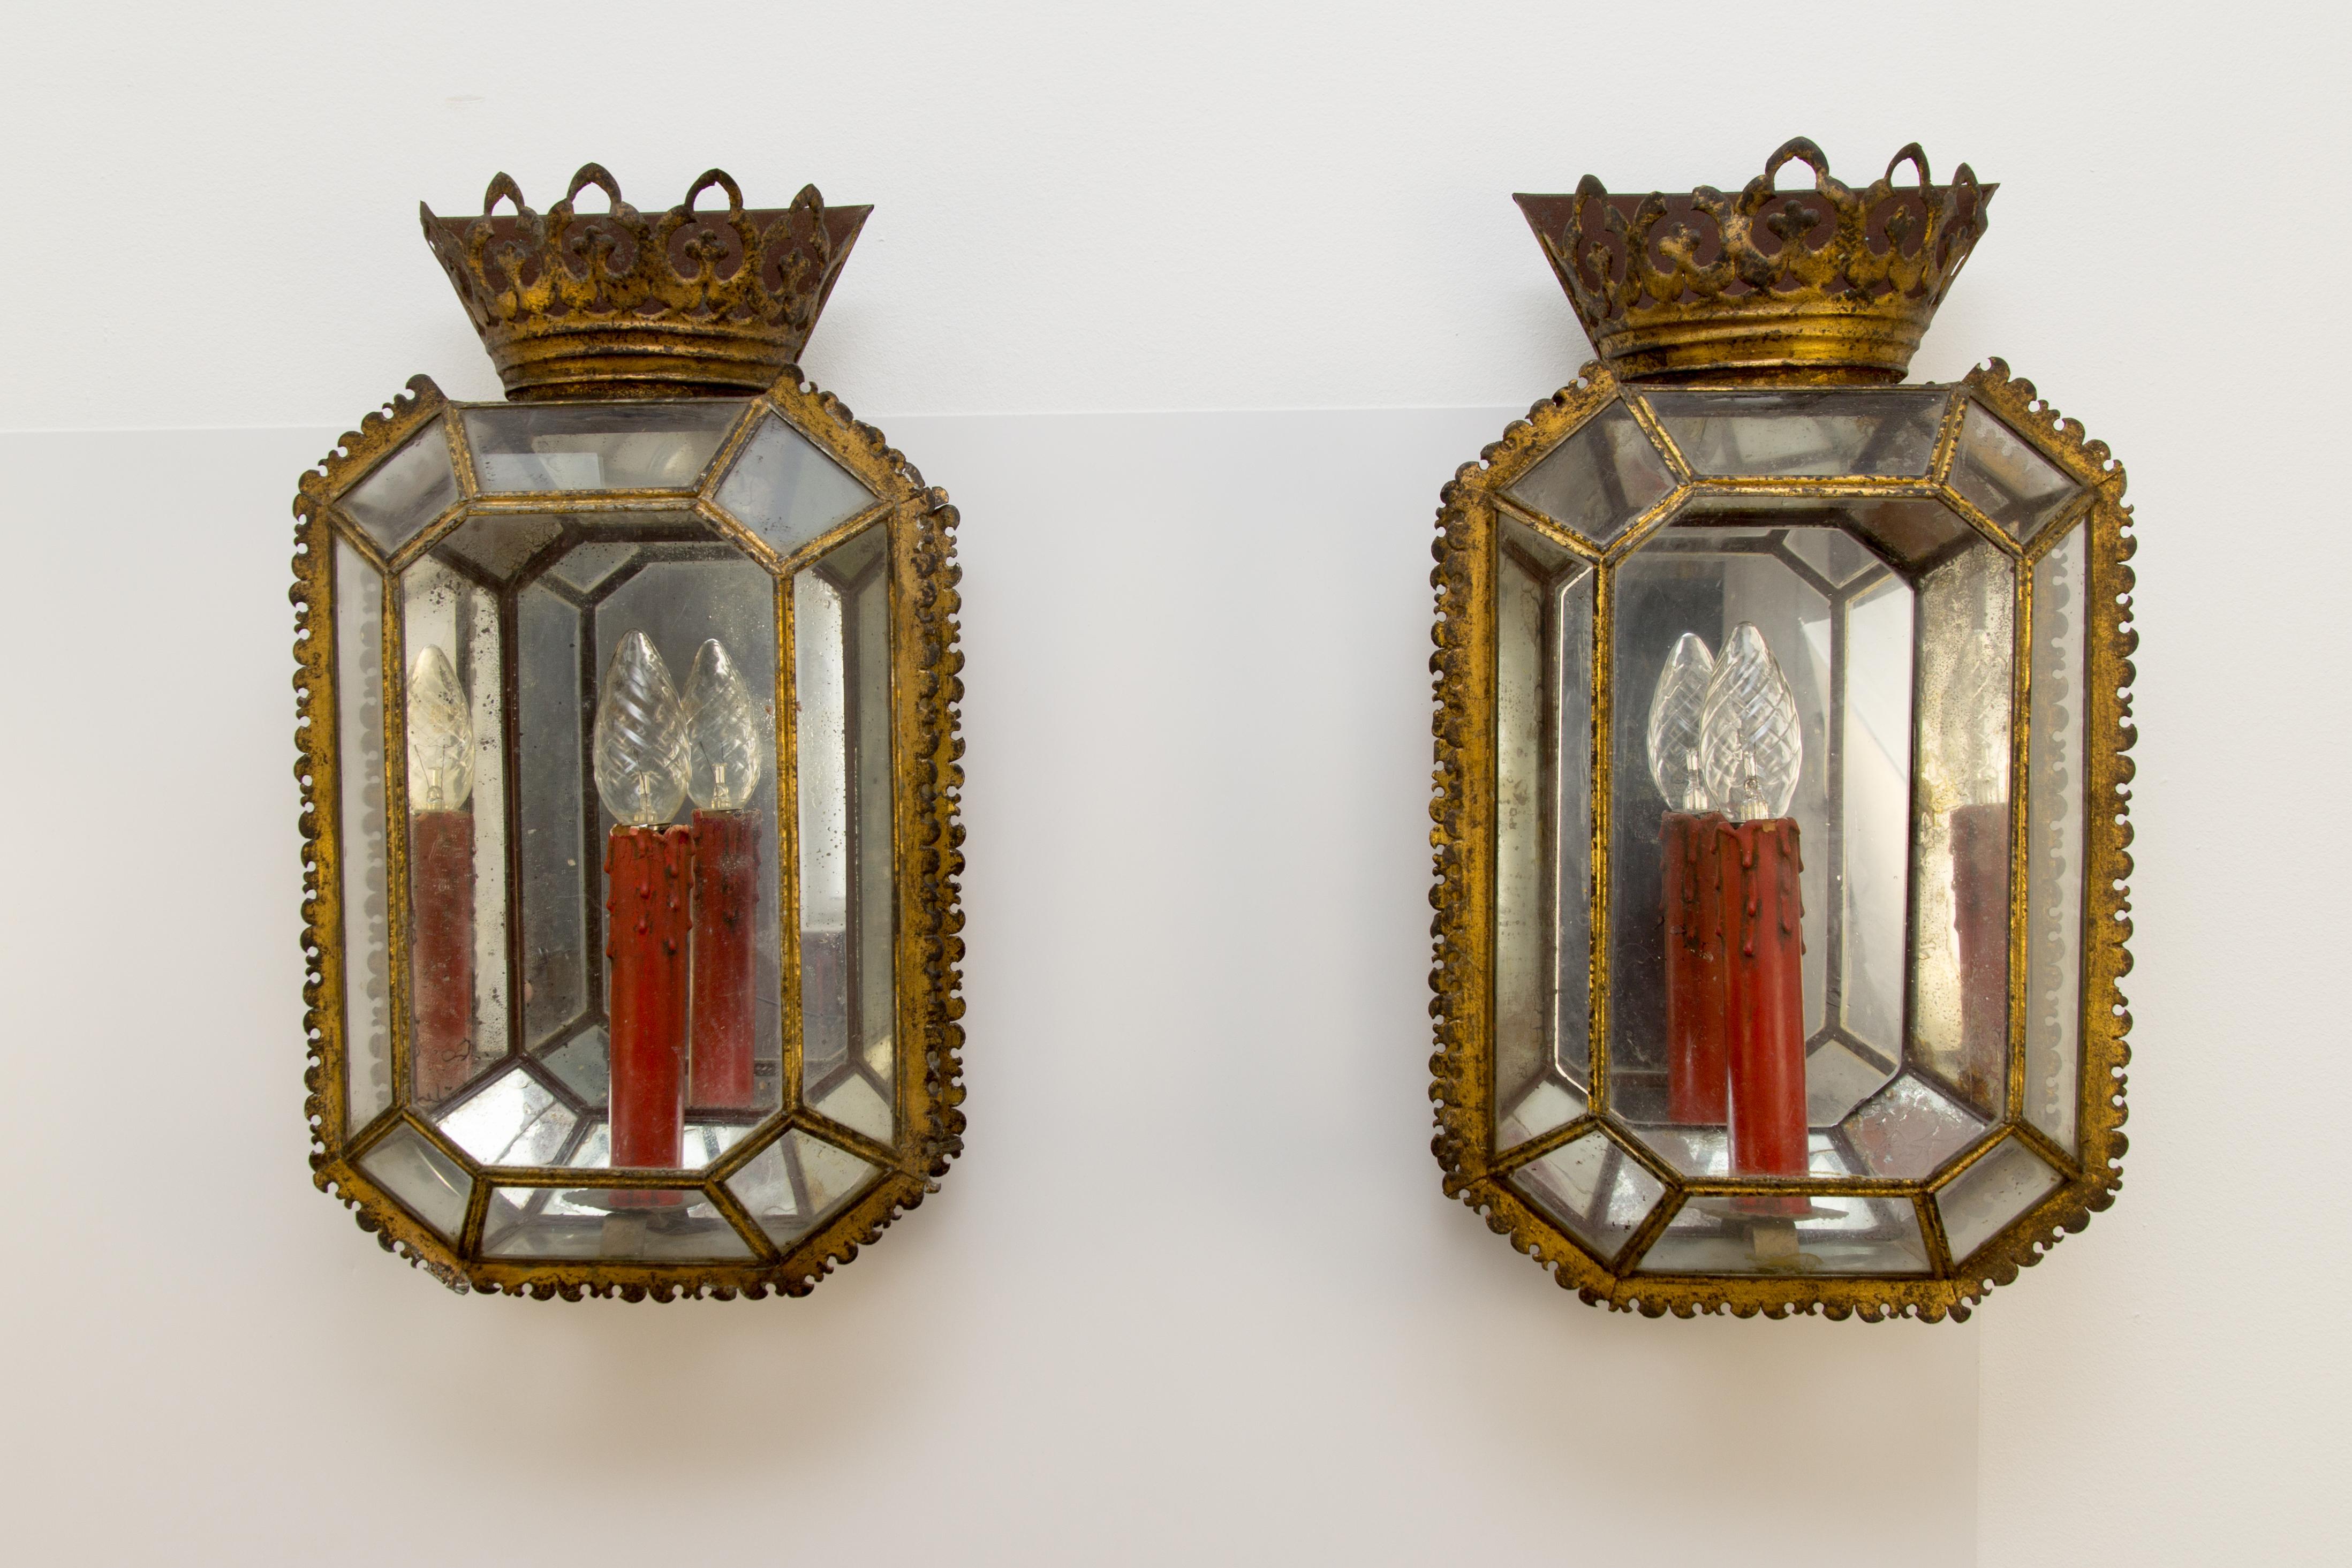 Pair of rare early 20th century Italian tole and glass sconces. Glass and mirror glass in background. Each has one socket for E 14 light bulb. Mirror and metal parts have a lovely vintage patina.
Dimensions:
Height 39 cm / 15.35 in; width 23 cm /